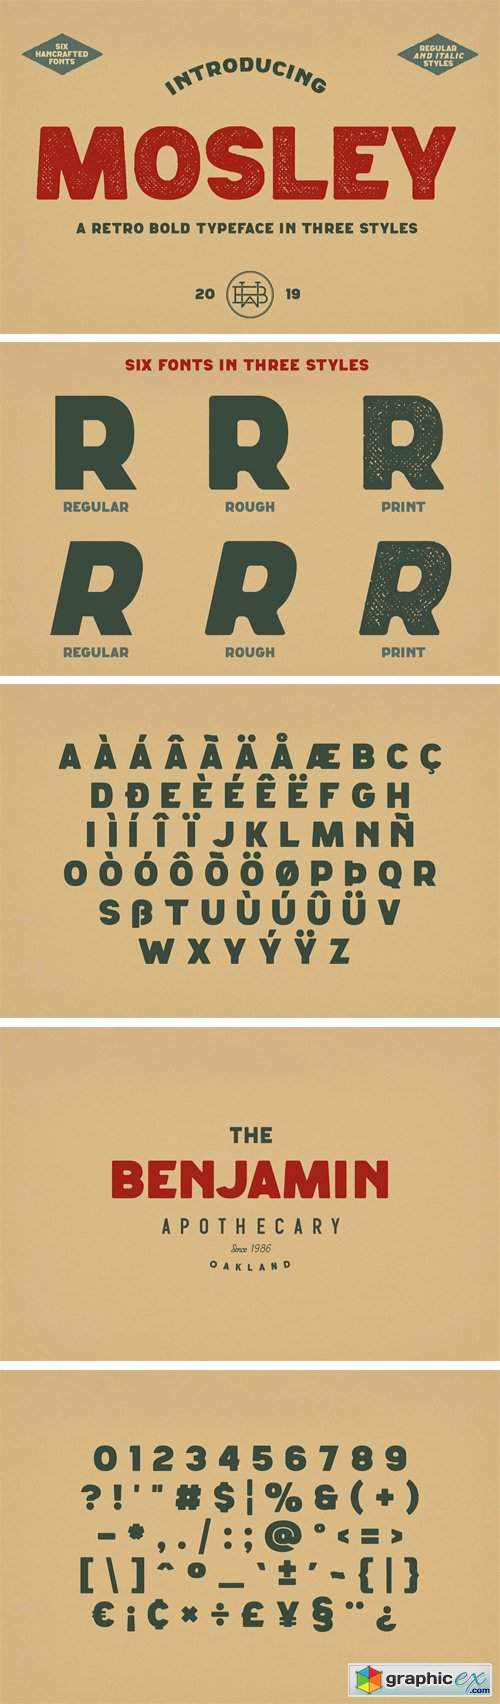 Mosley Font Family